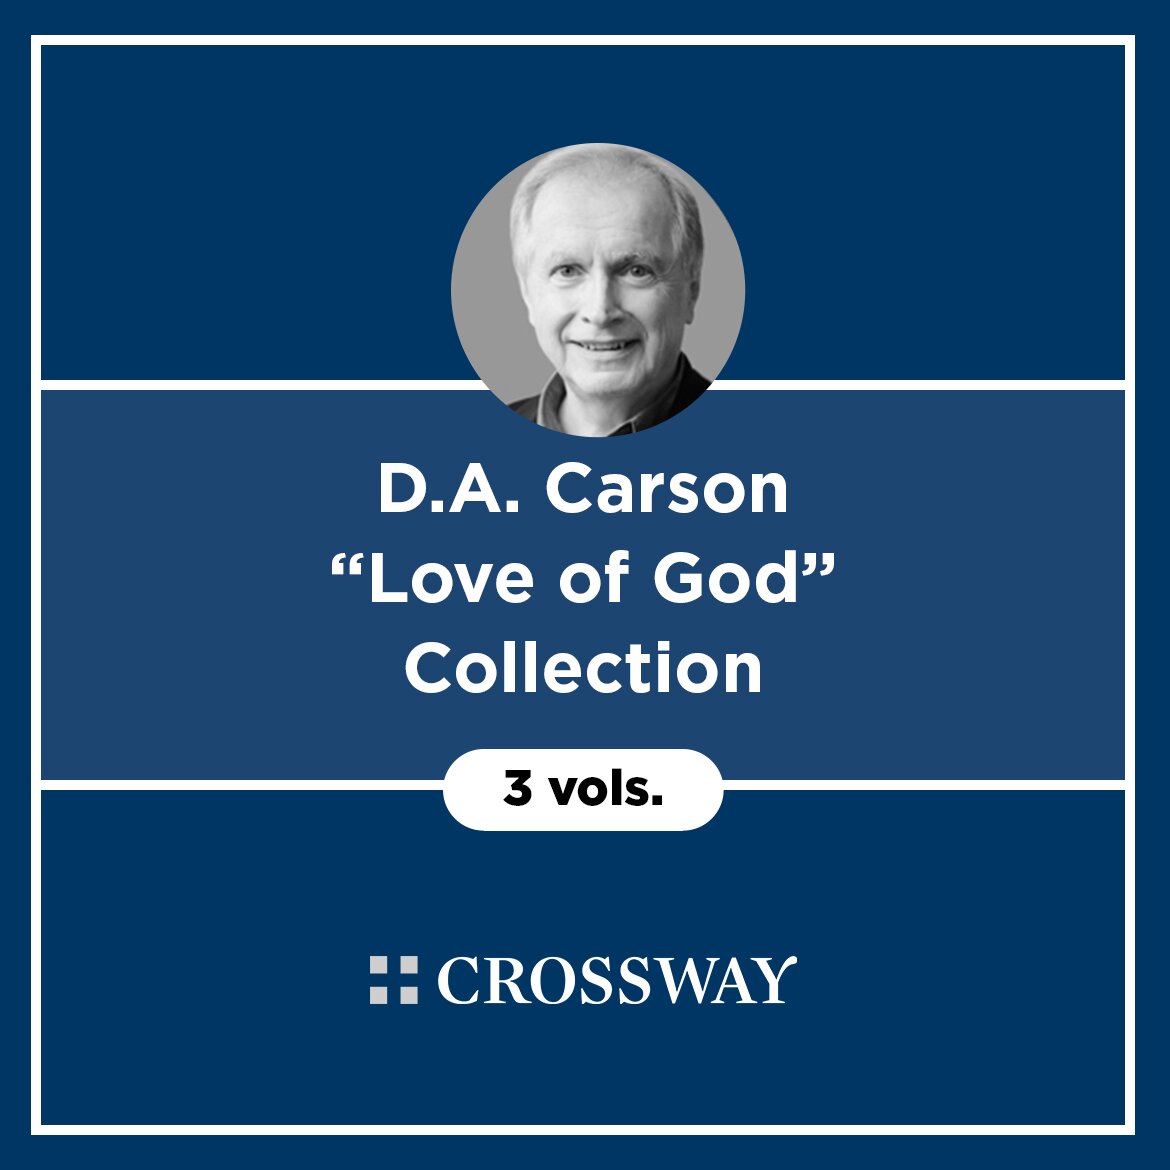 D.A. Carson “Love of God” Collection (3 vols.)